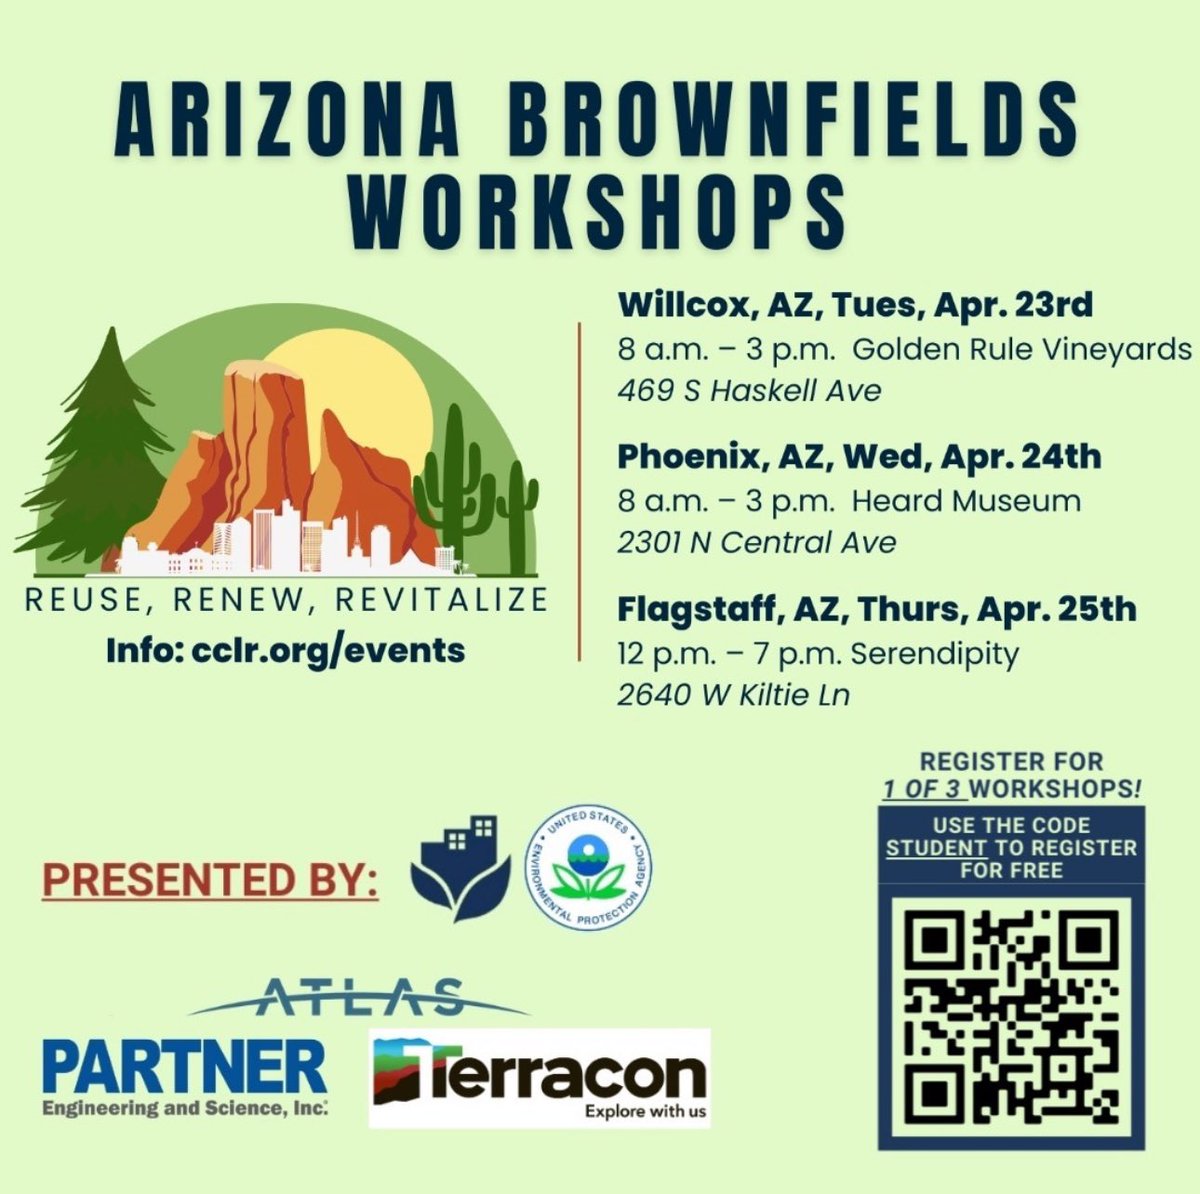 We’ll be attending ALL 3 Arizona Brownfields Workshops! Please come learn alongside us and also learn about the resources available to you! See below to register.